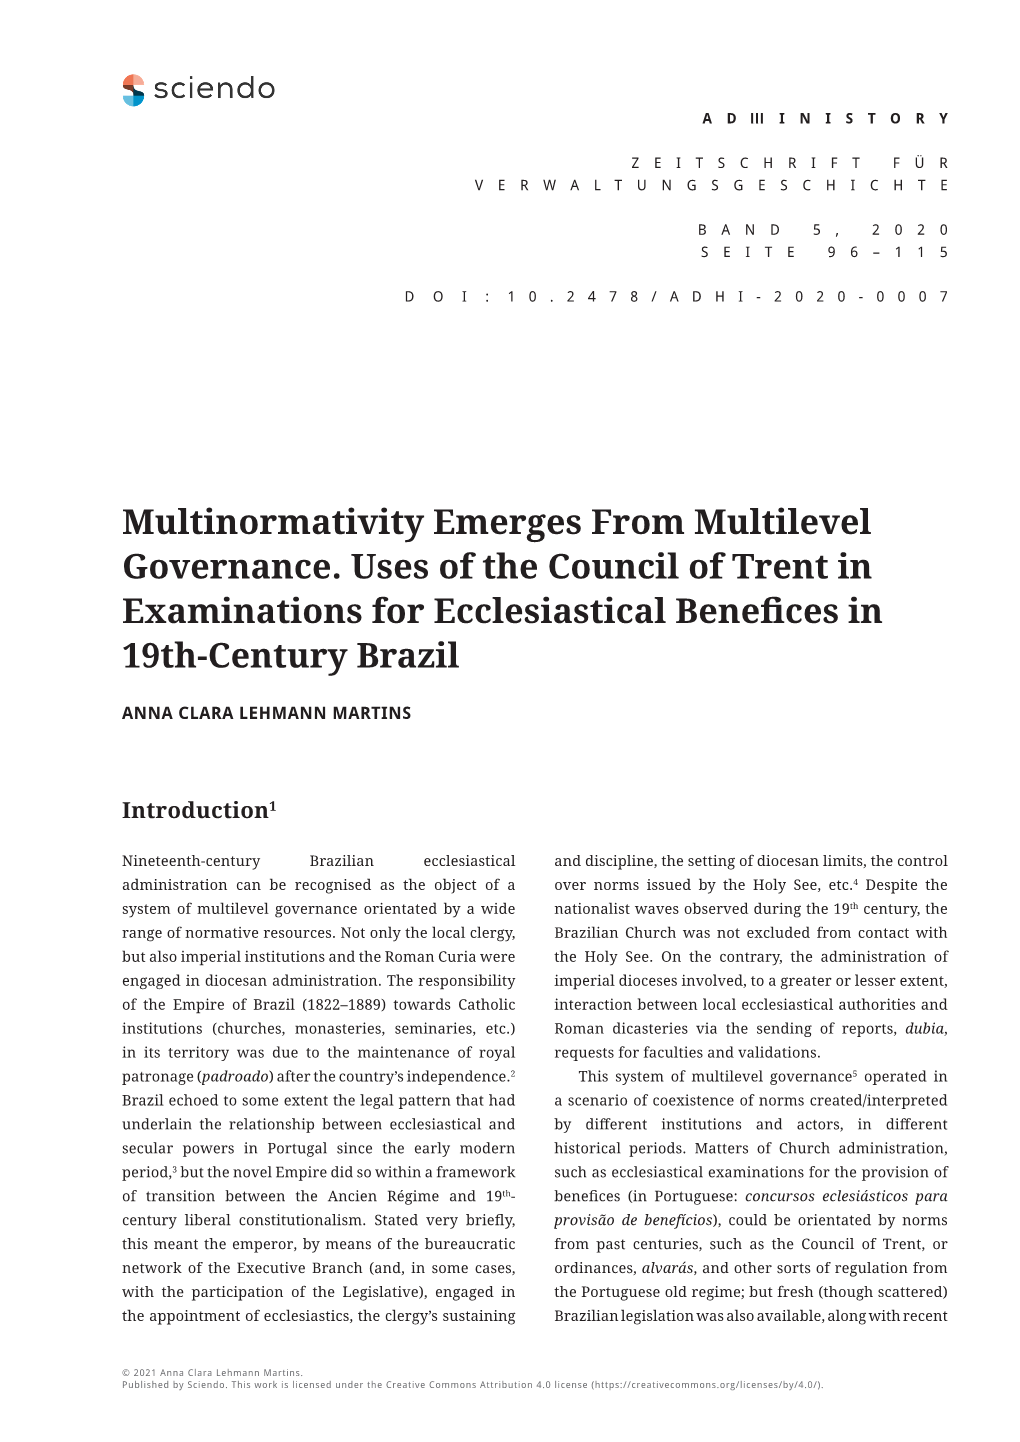 Multinormativity Emerges from Multilevel Governance. Uses of the Council of Trent in Examinations for Ecclesiastical Benefices in 19Th-Century Brazil